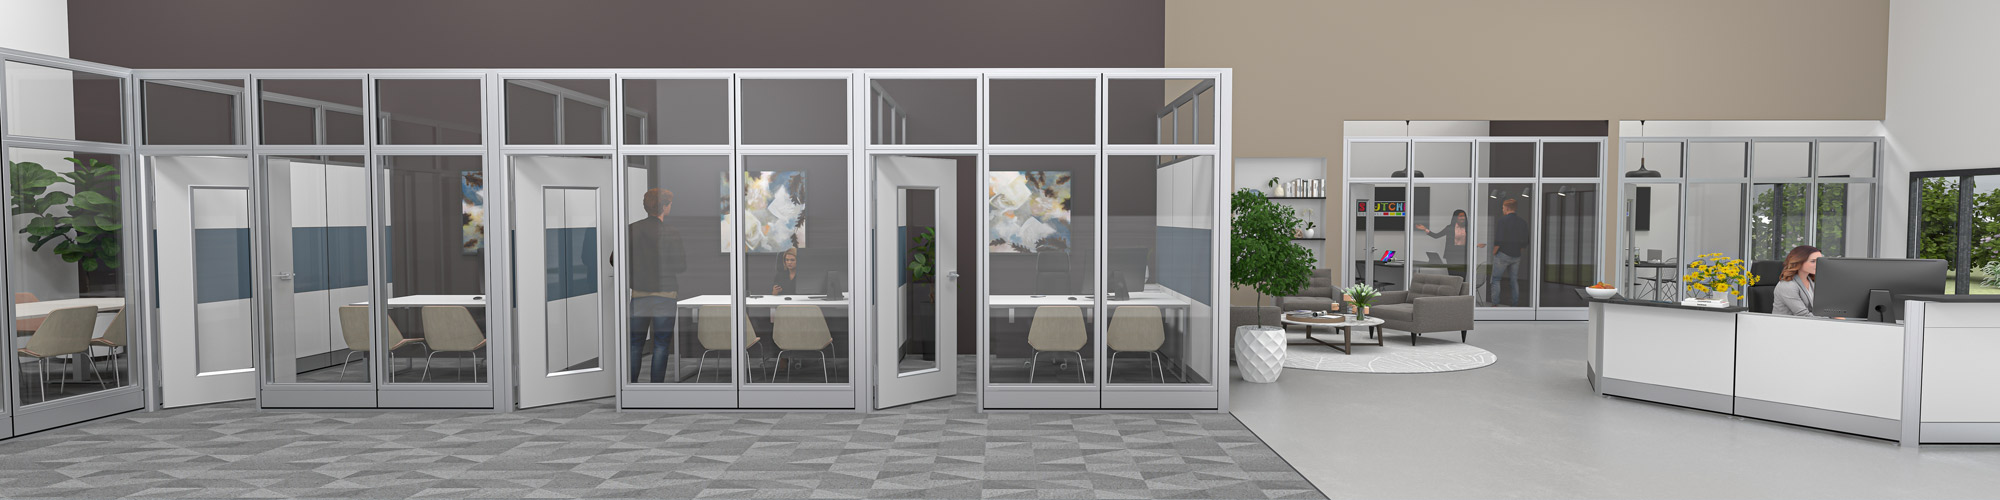 Cubicle Walls with Glass and Doors